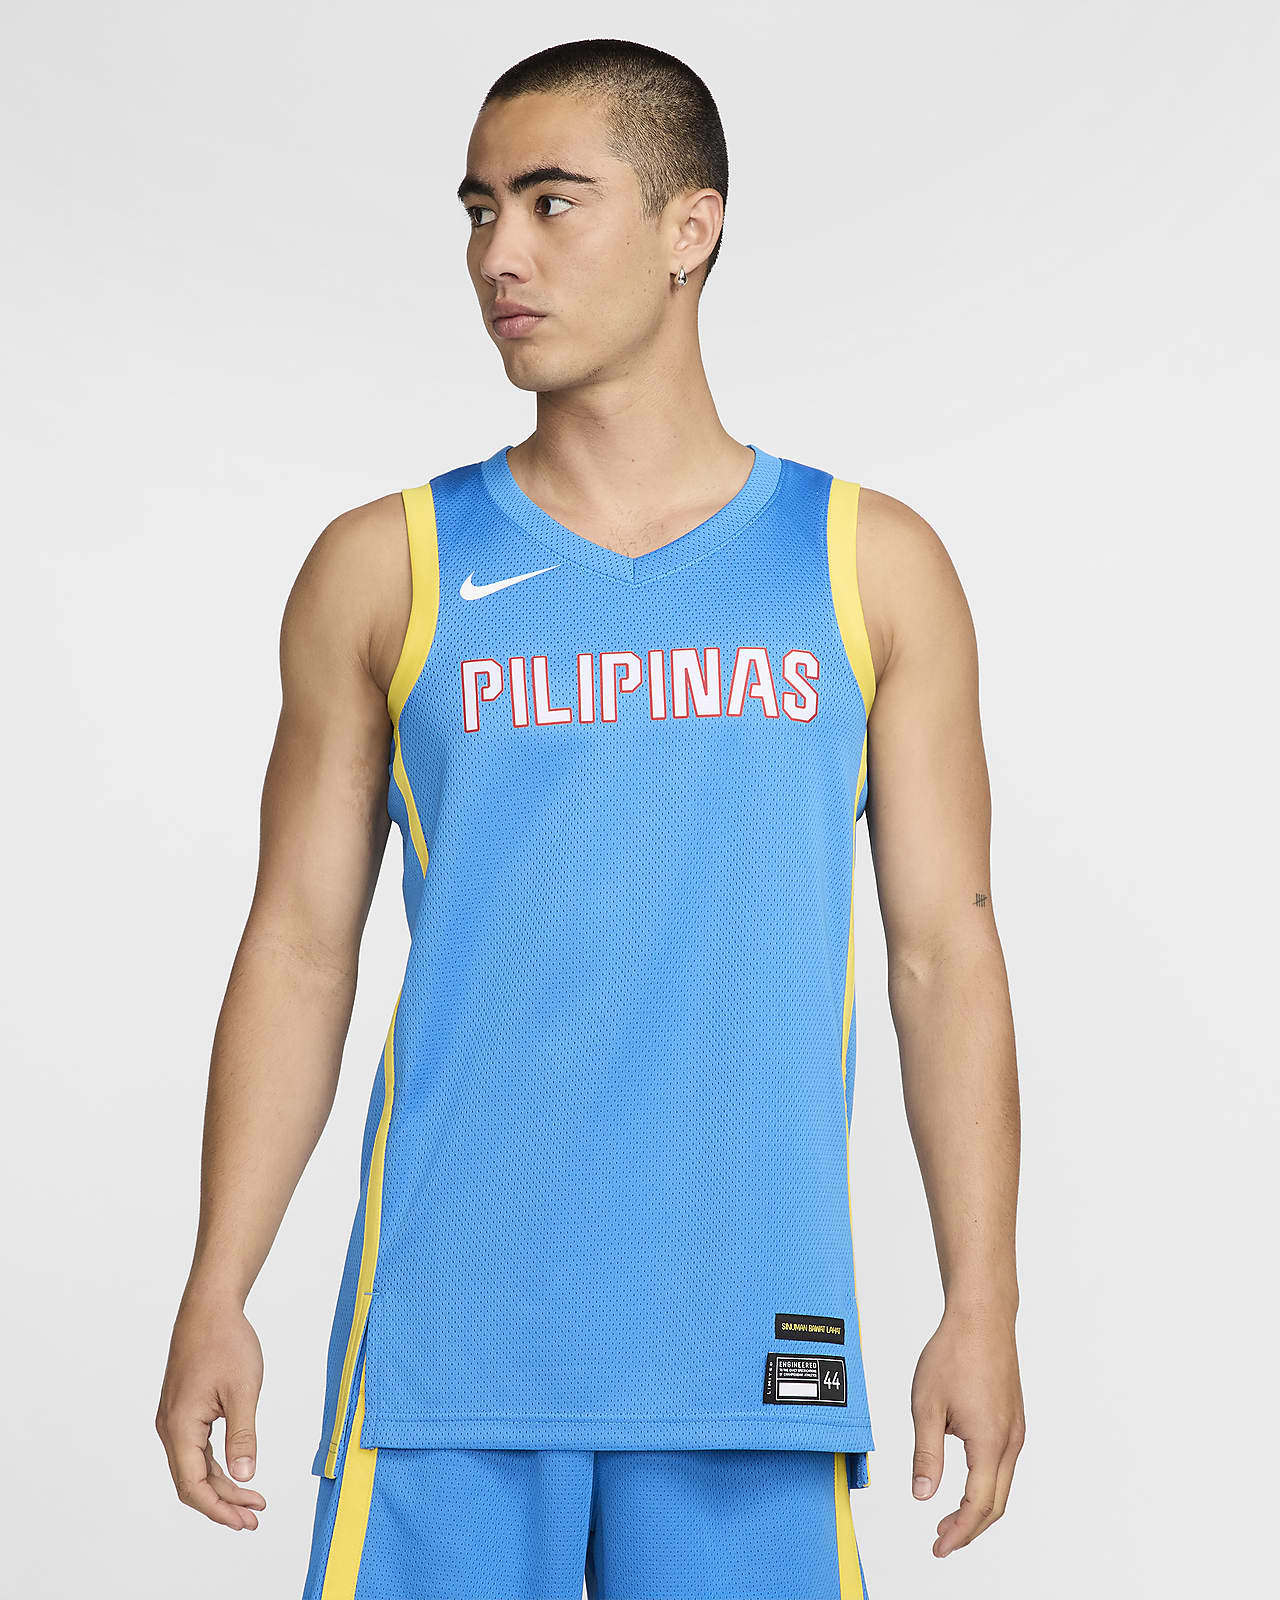 Philippines Limited Road Men's Nike Basketball Jersey